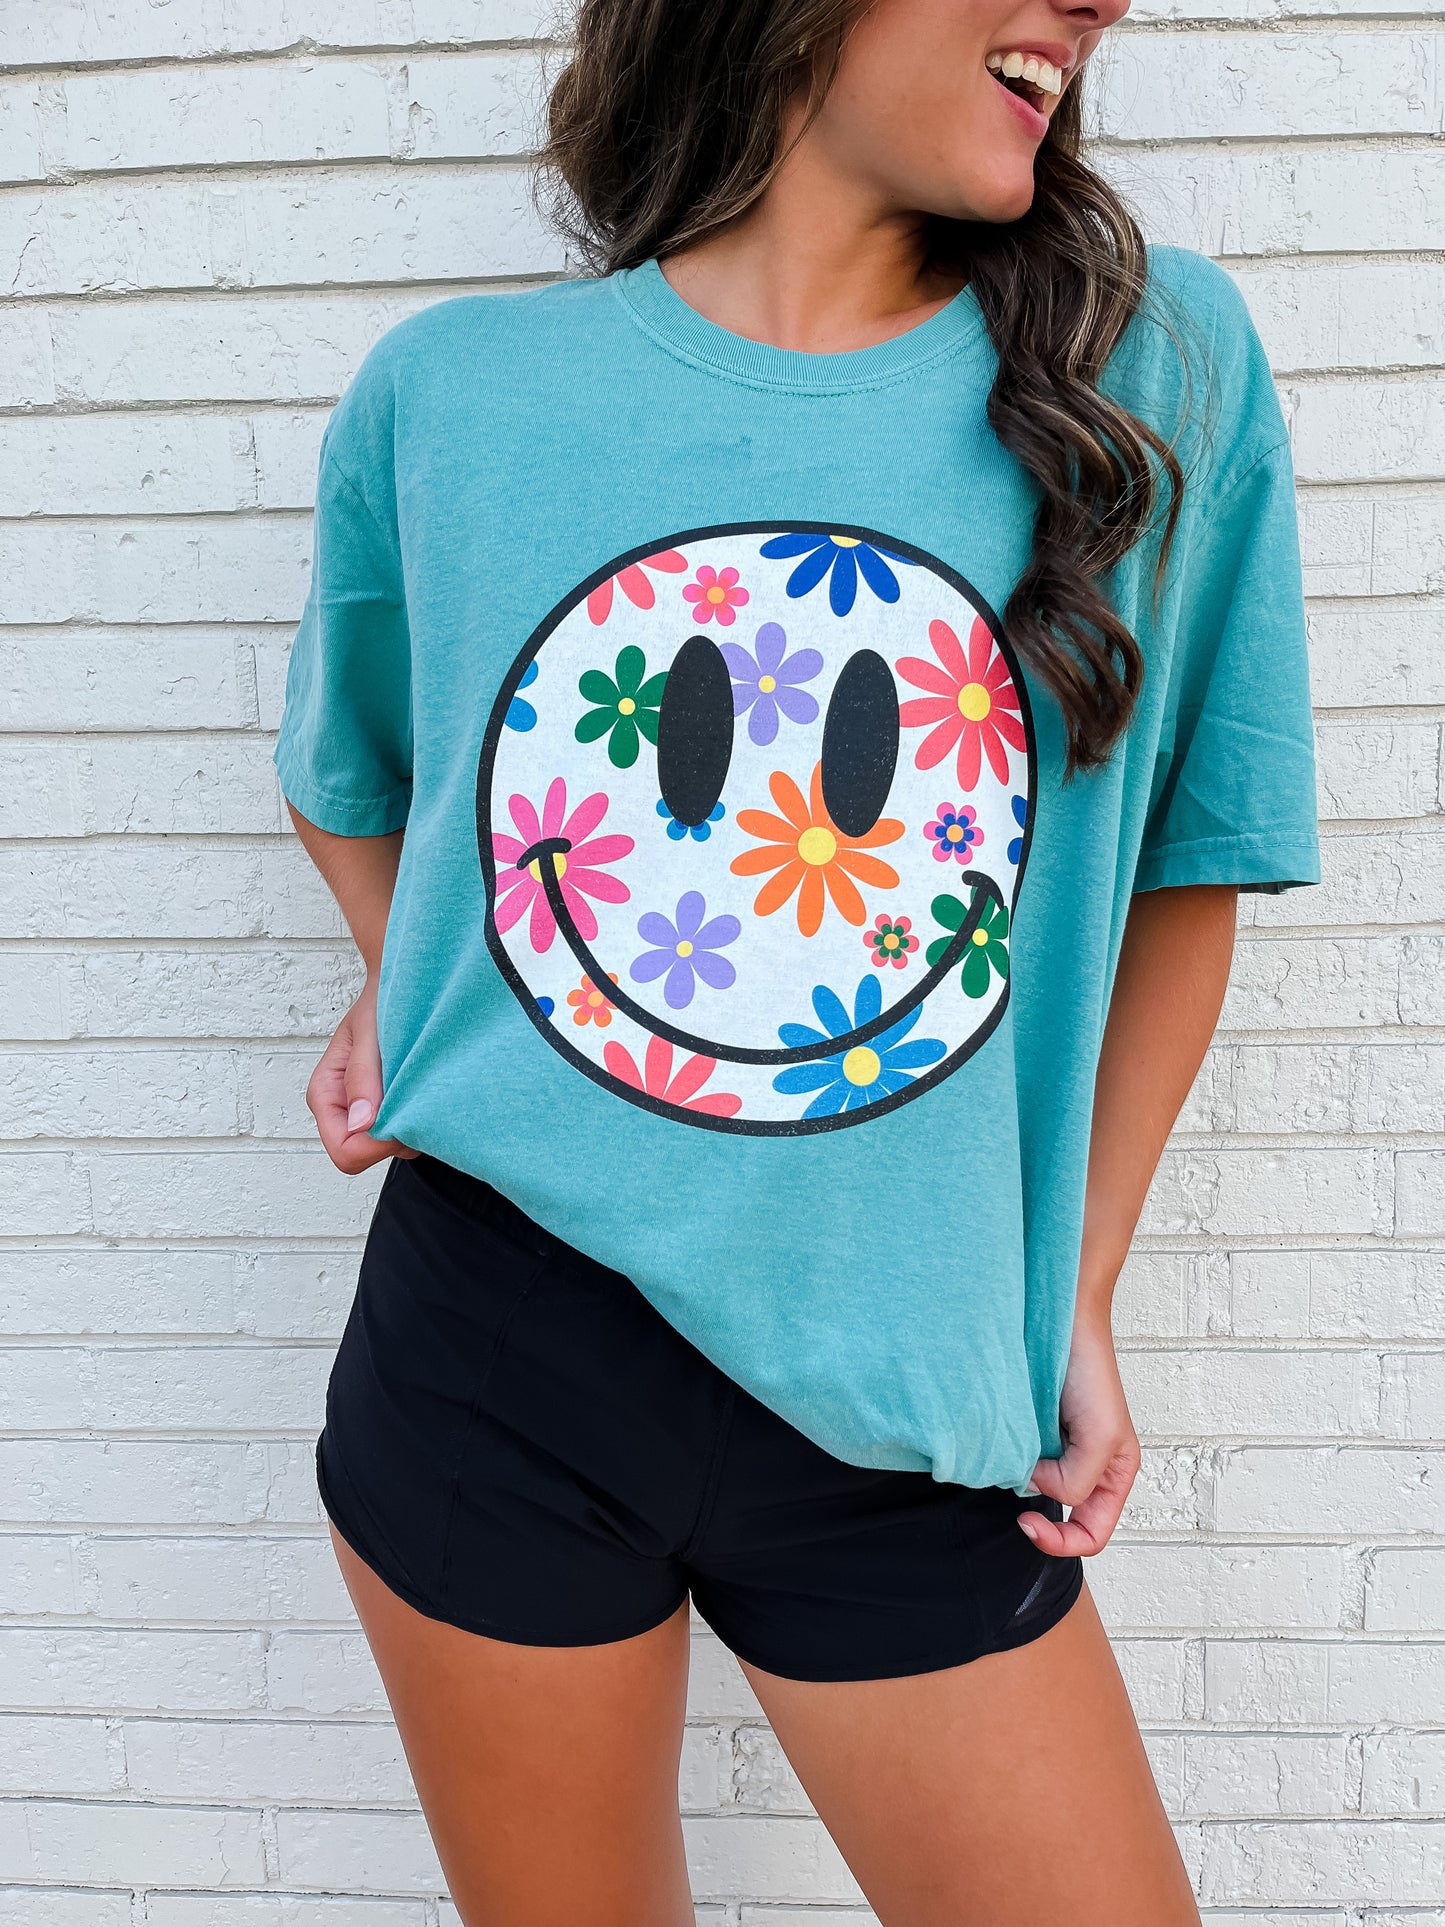 Vibrant Floral Smiley Tee